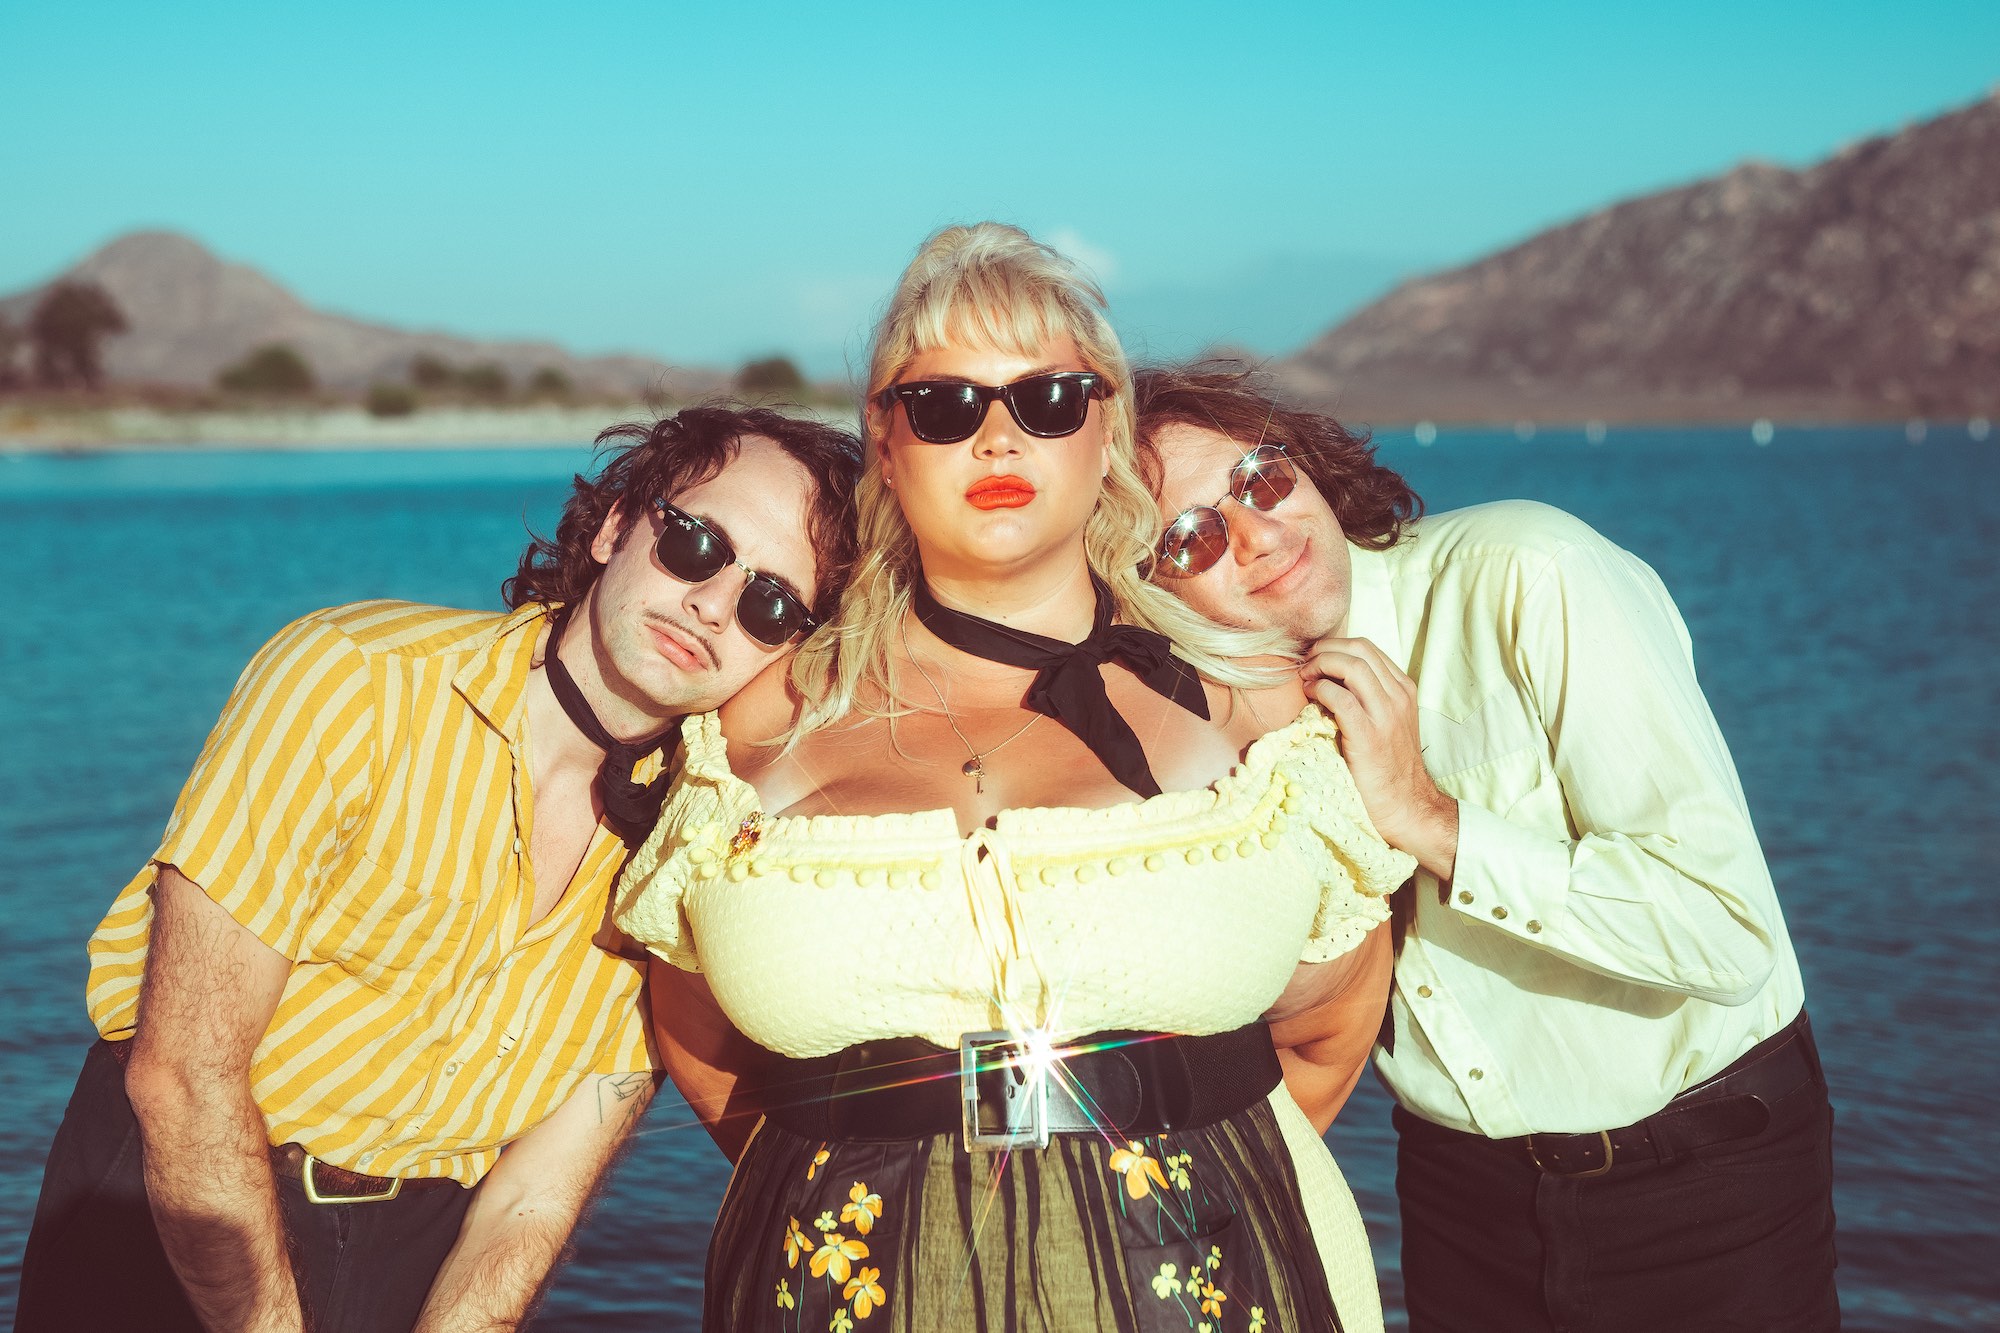 Shannon & the Clams